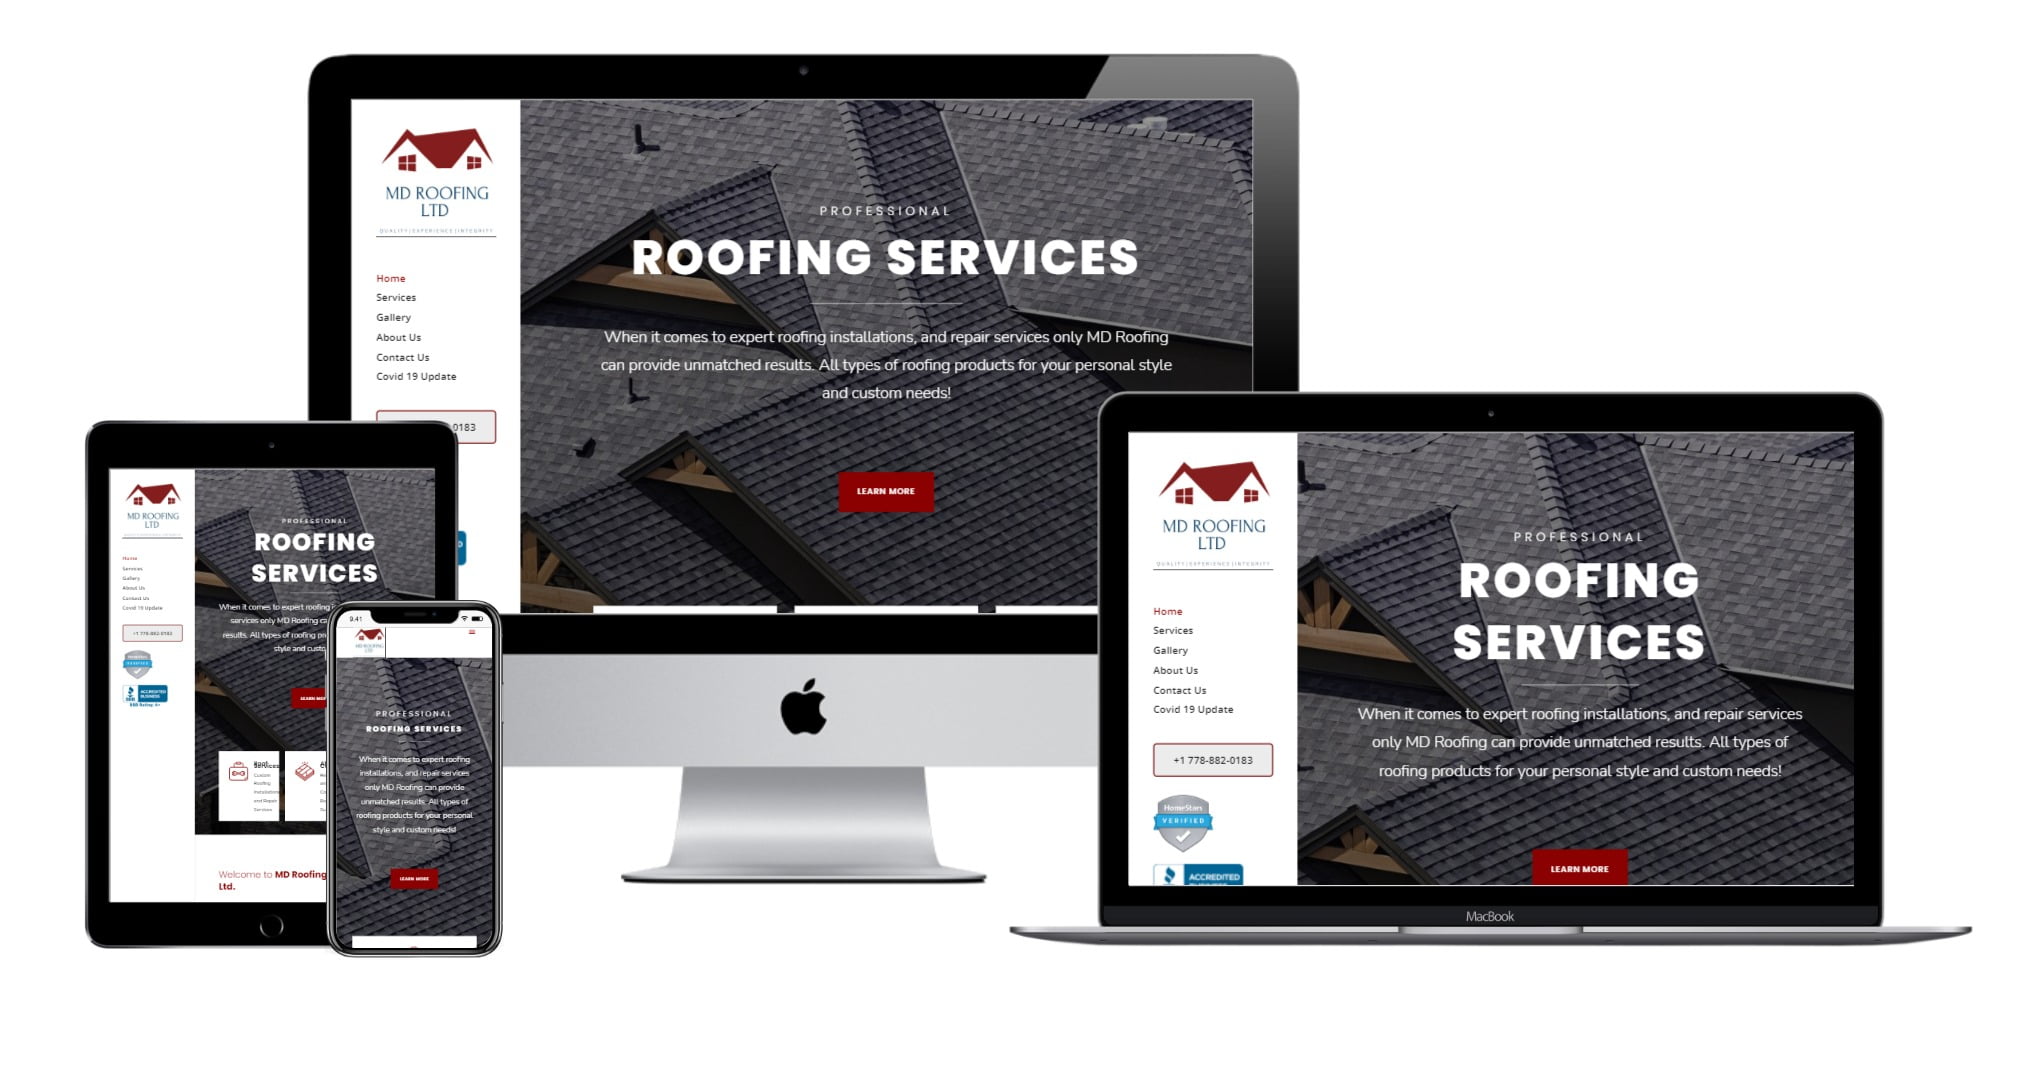 Roofing Contractor Website Designing for MD Roofing Ltd – mdroofingservices.ca